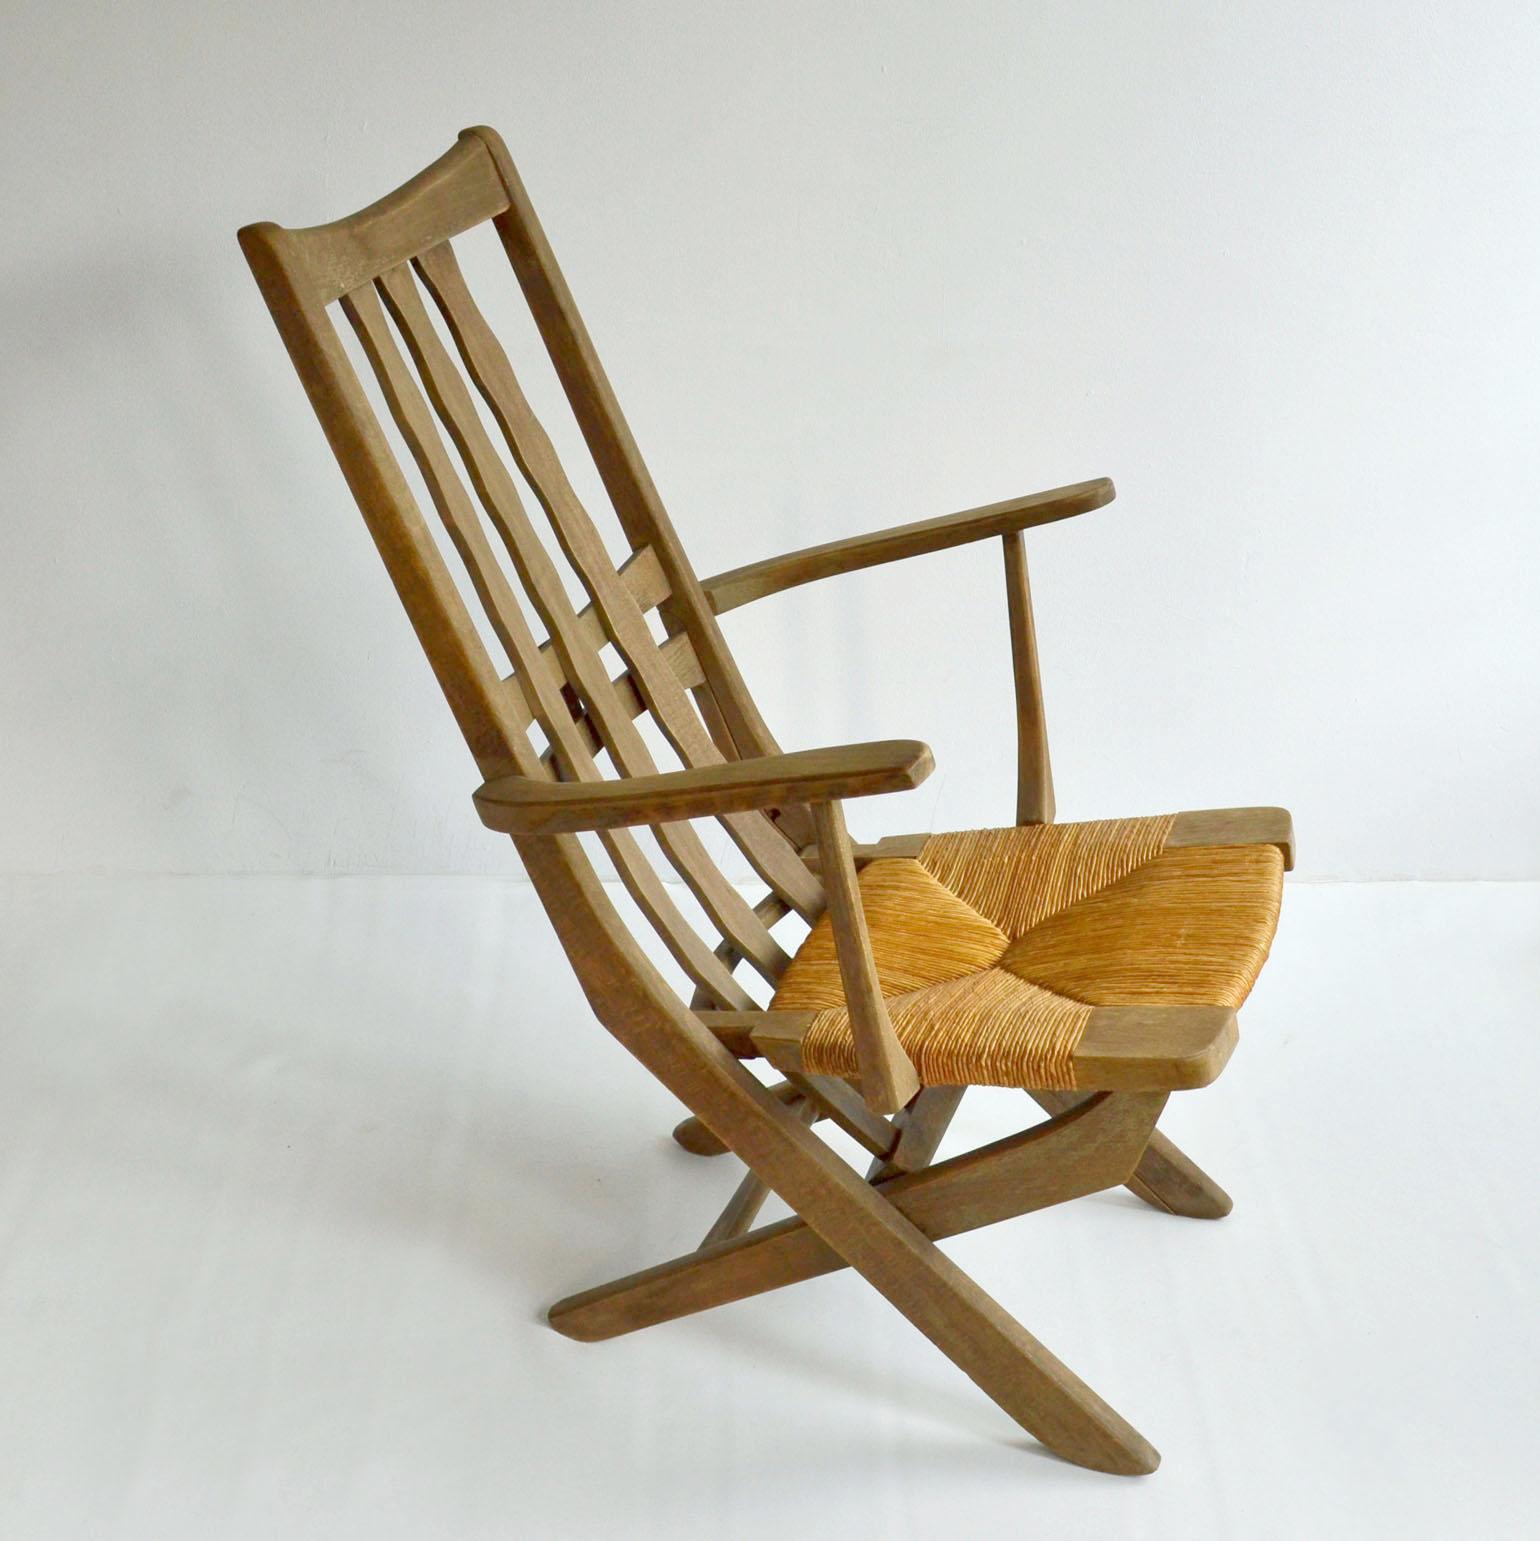 Pair of French Modernist Outdoor Oak Chairs, French, 1950s For Sale 6